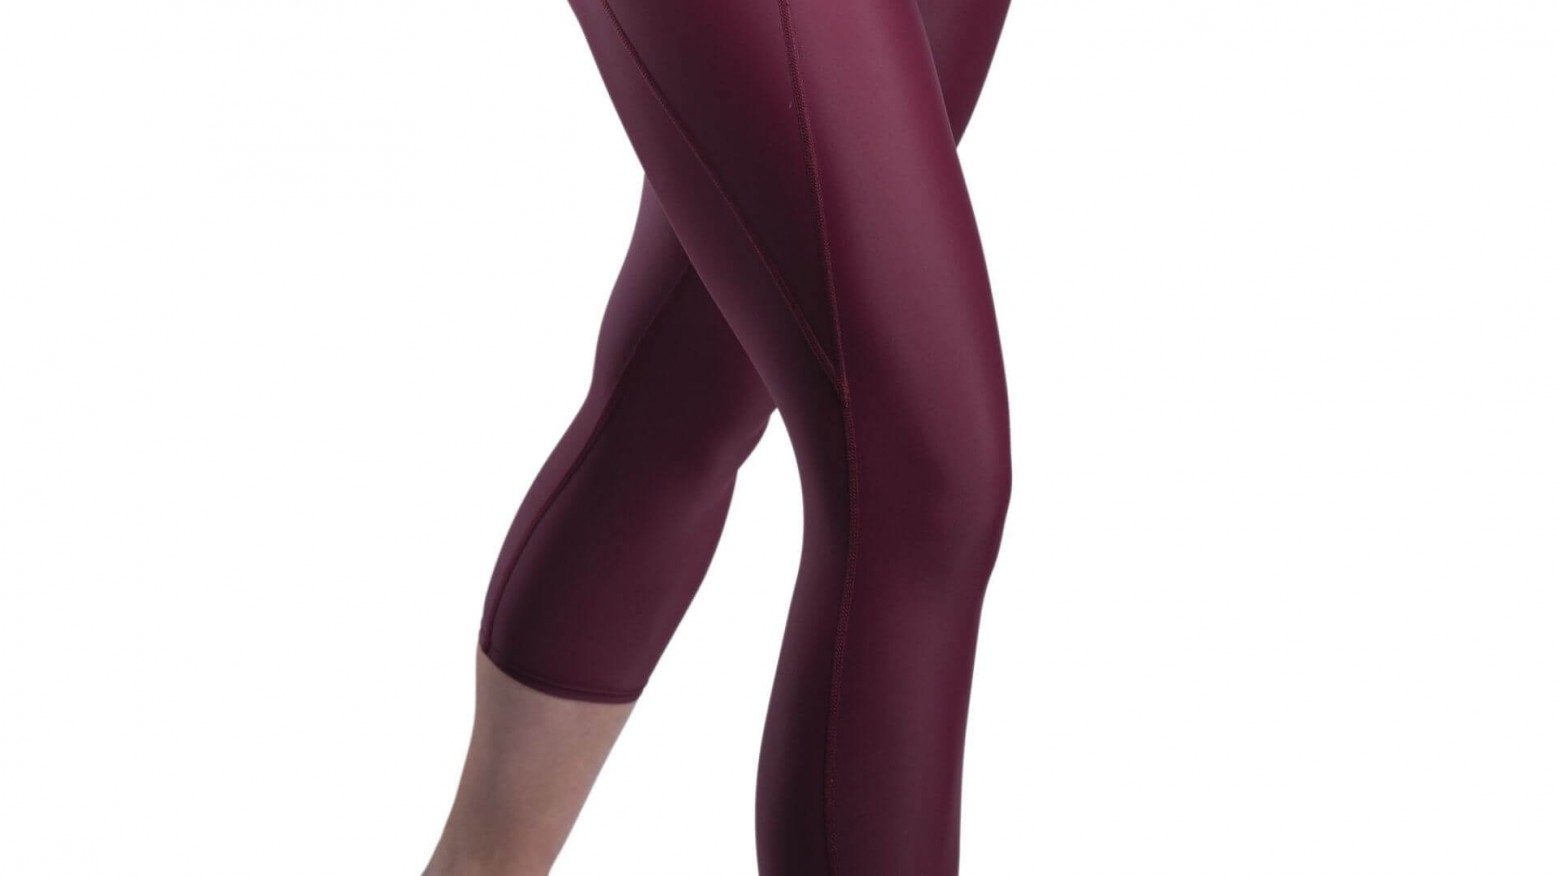 Side view of a woman's knee and legs wearing purple maroon activewear